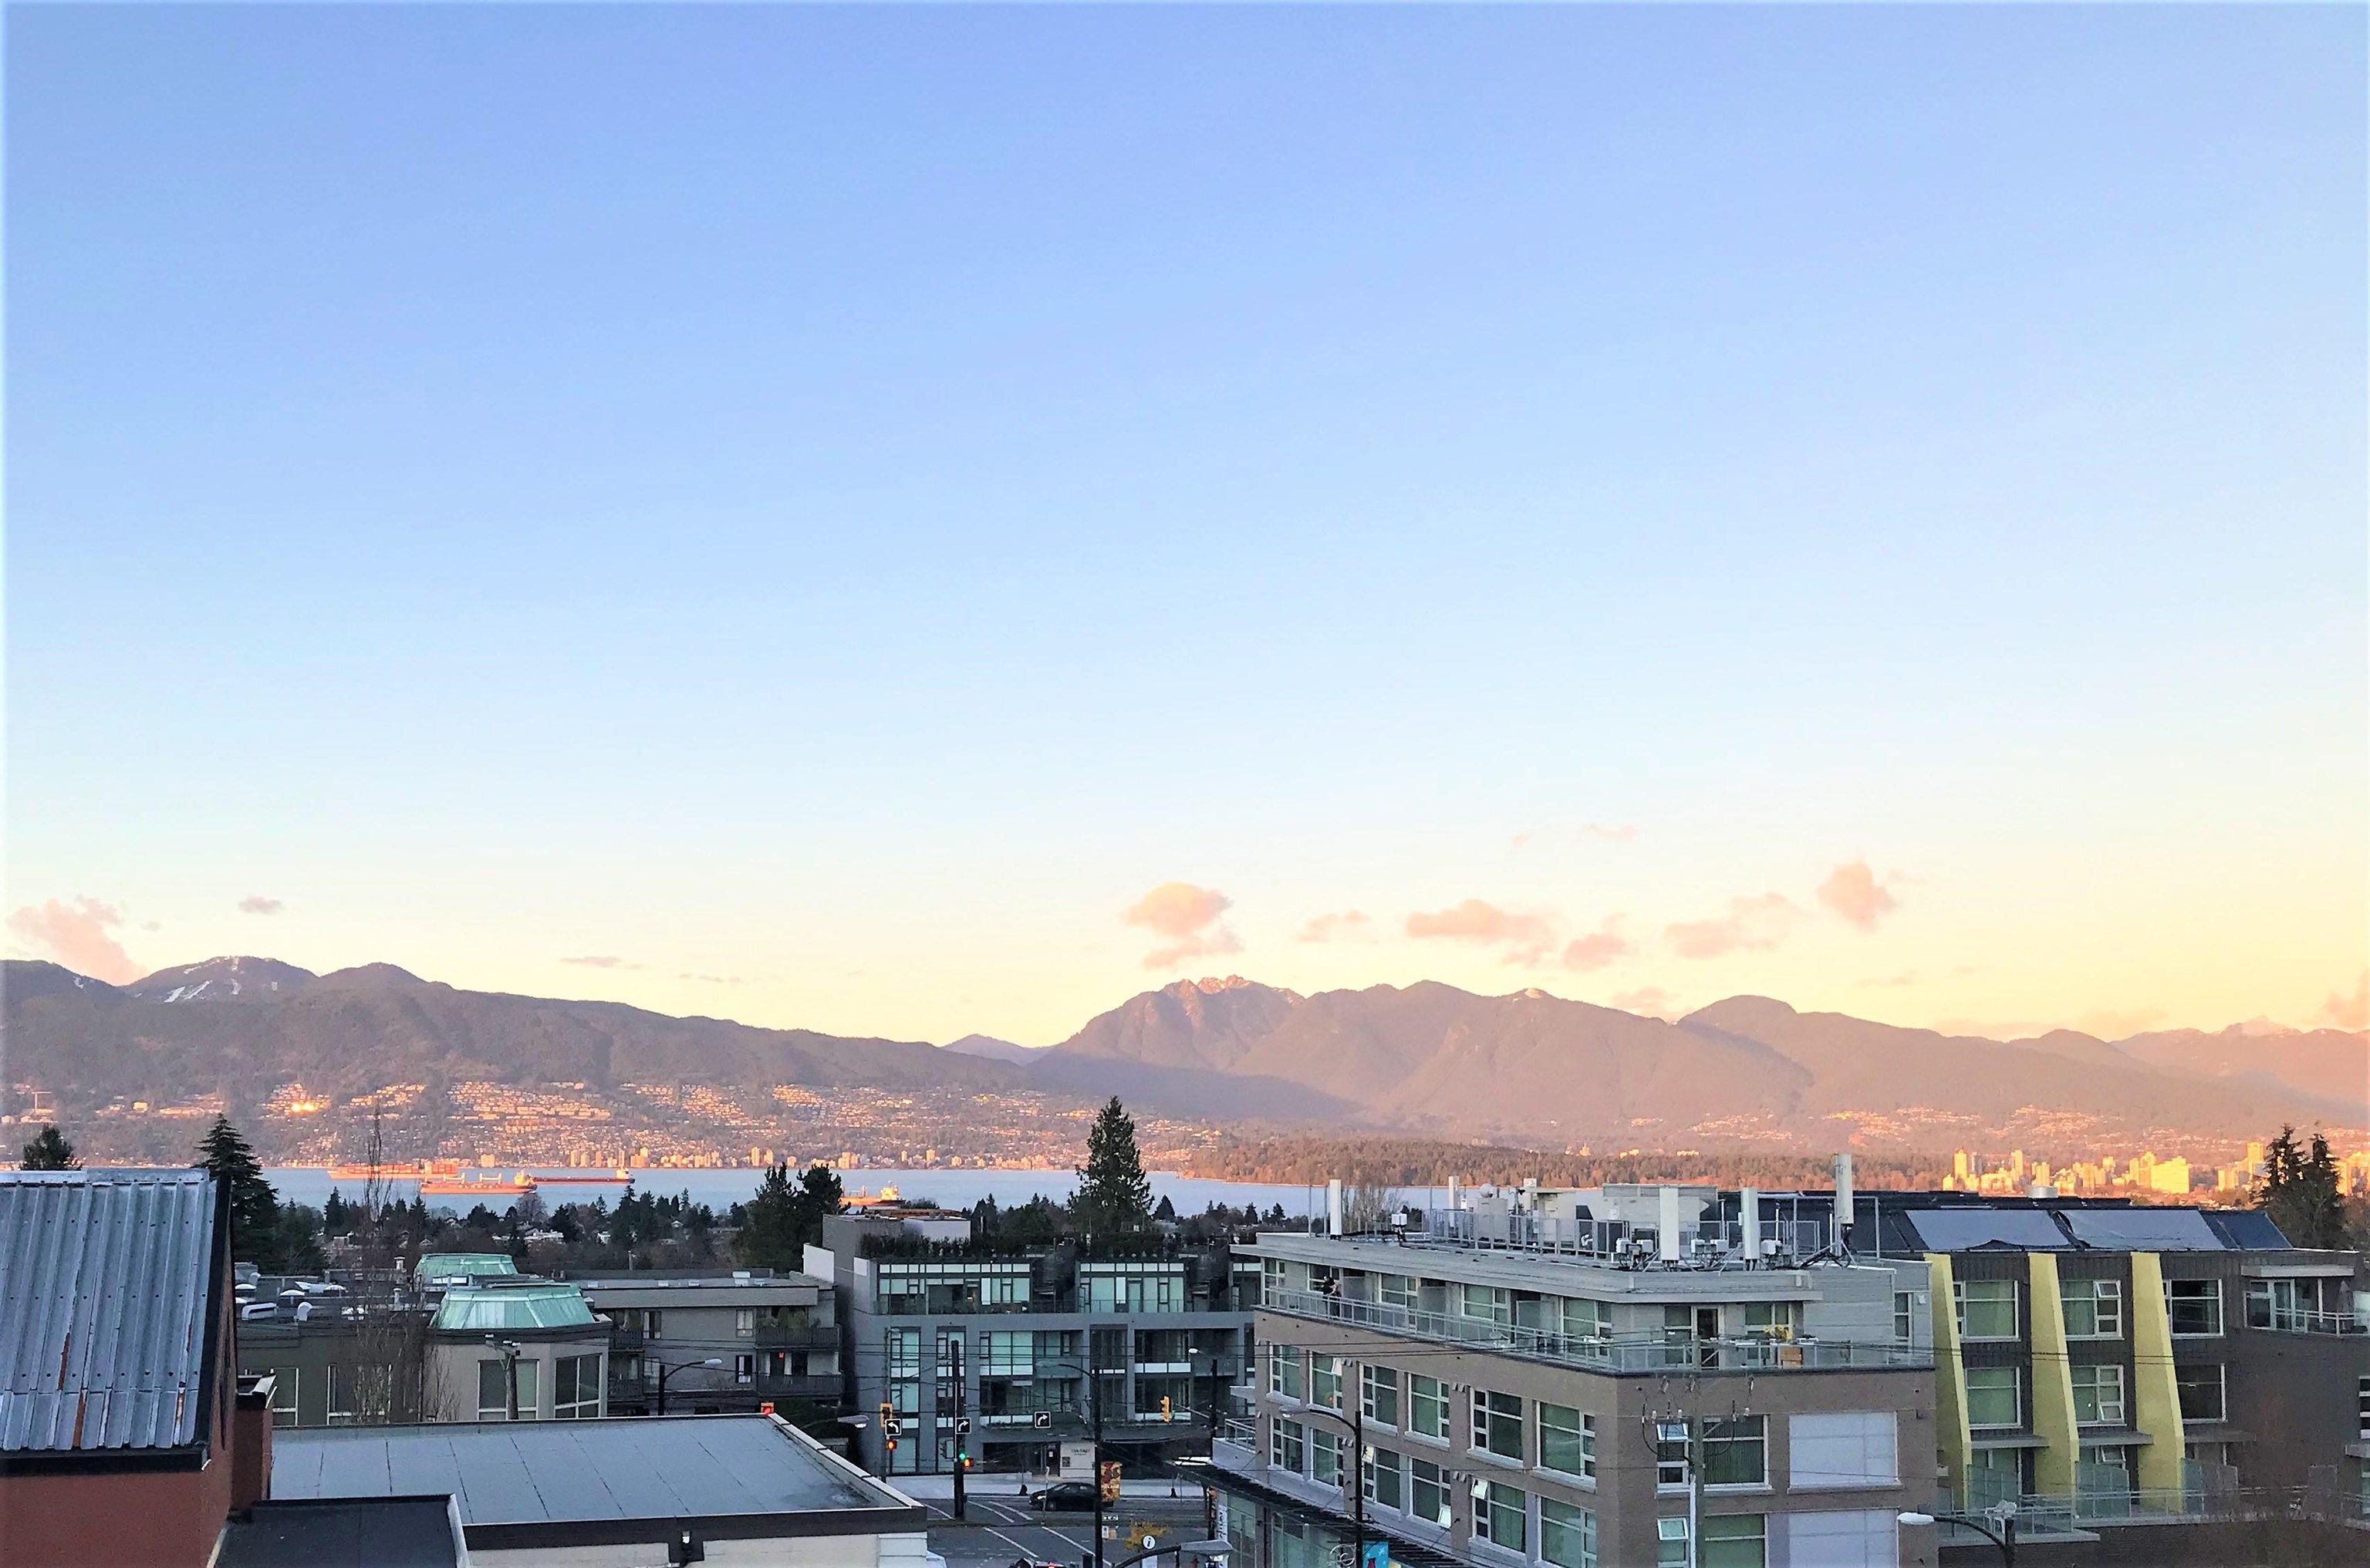 Main Photo: 102 3349 DUNBAR Street in Vancouver: Dunbar Townhouse for sale (Vancouver West)  : MLS®# R2634302